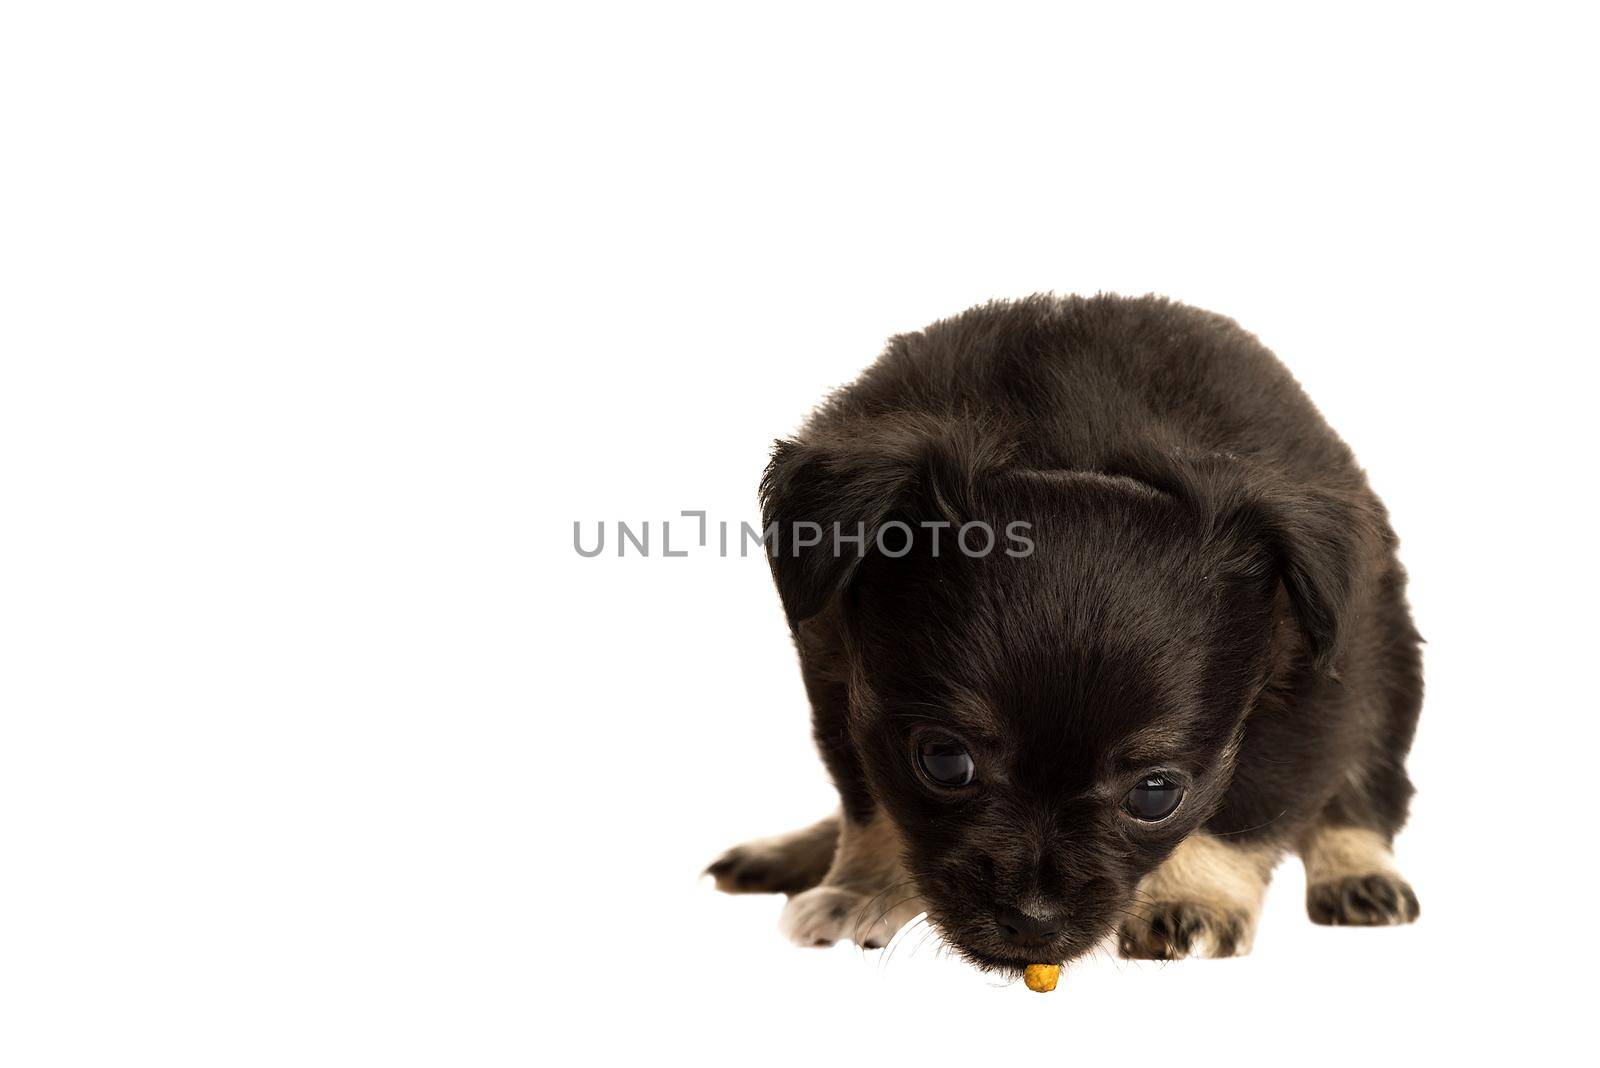 Cute little chihuahua puppy isolated in white background eating by LeoniekvanderVliet